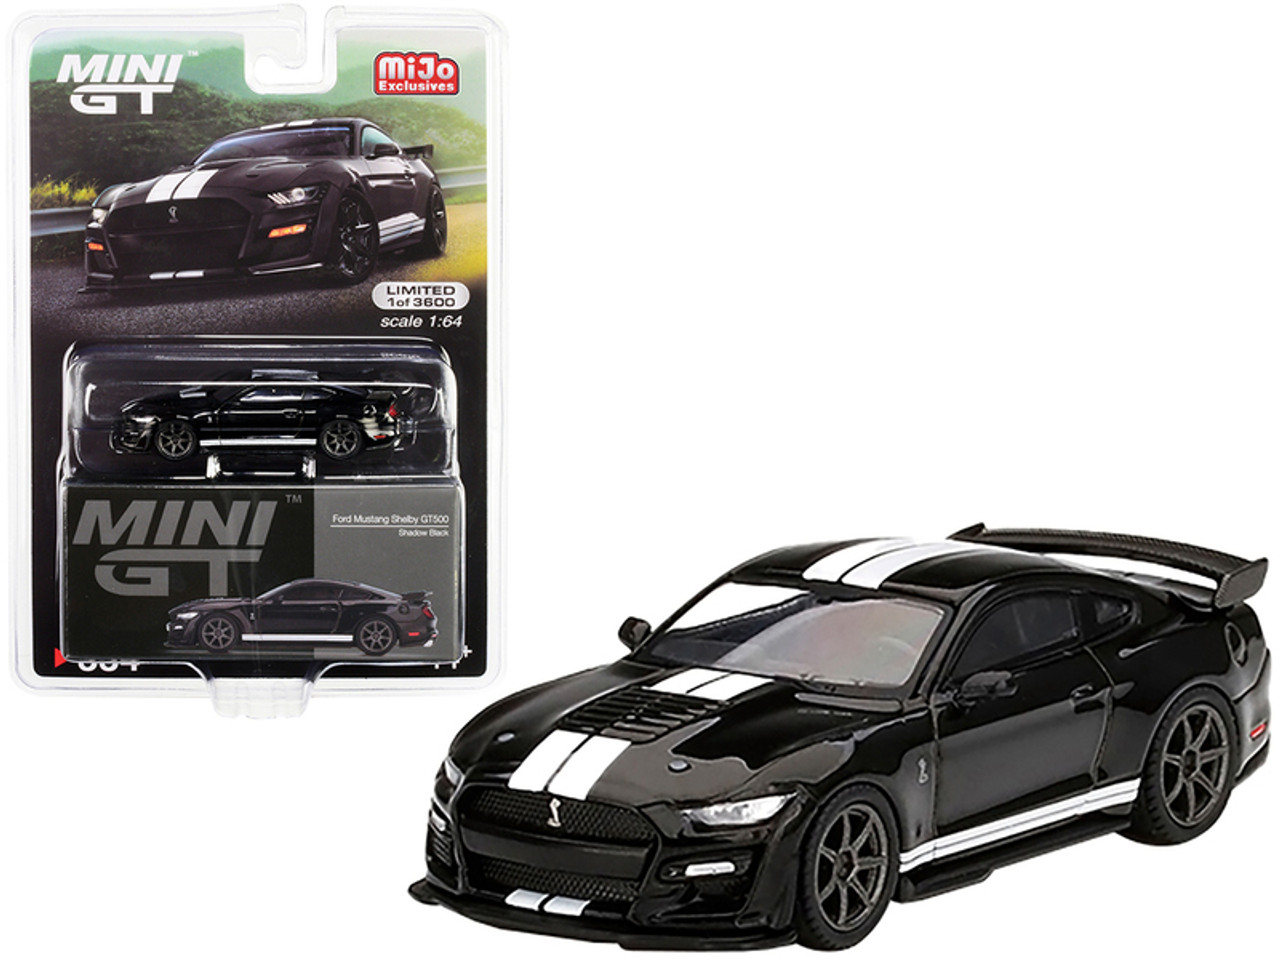 1/64 Mini GT Ford Mustang Shelby GT500 (Shadow Black with White Stripes Limited Edition Diecast Car Model